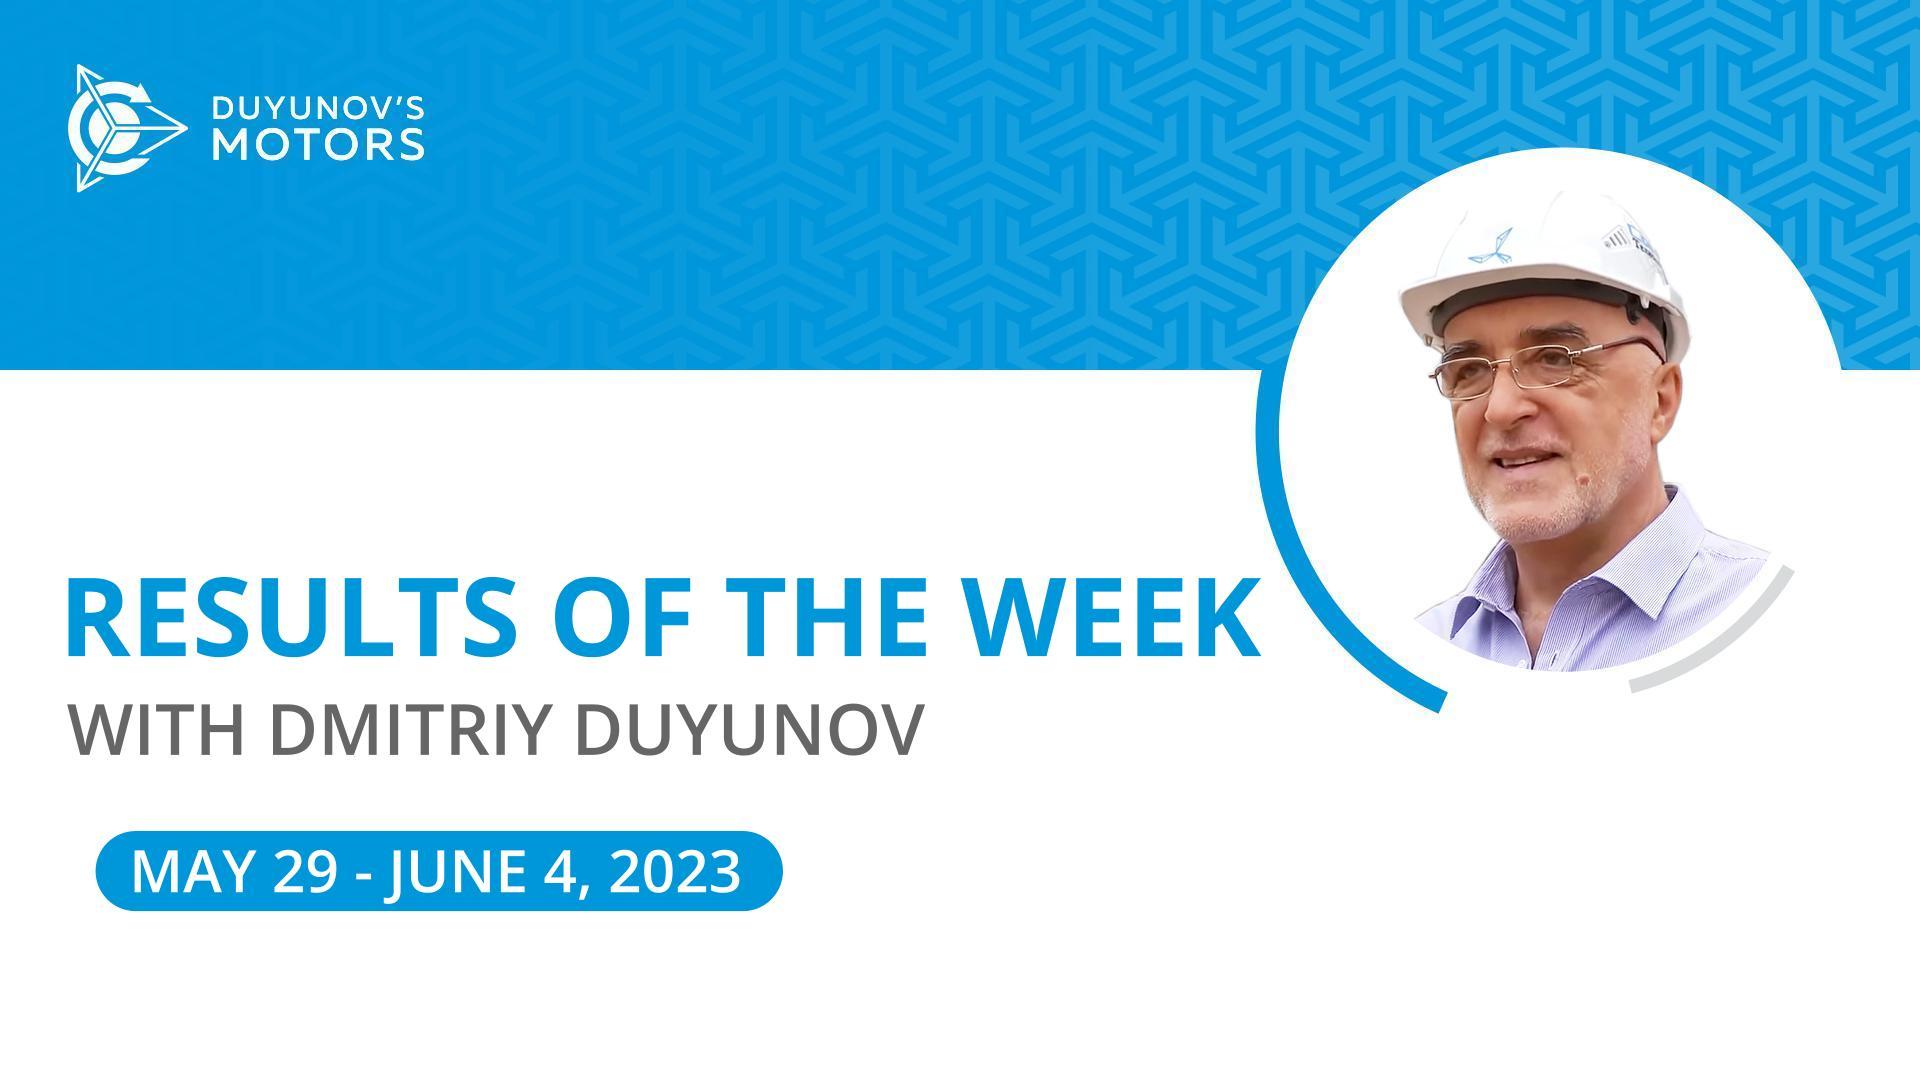 Results of the week in the project "Duyunov's motors"